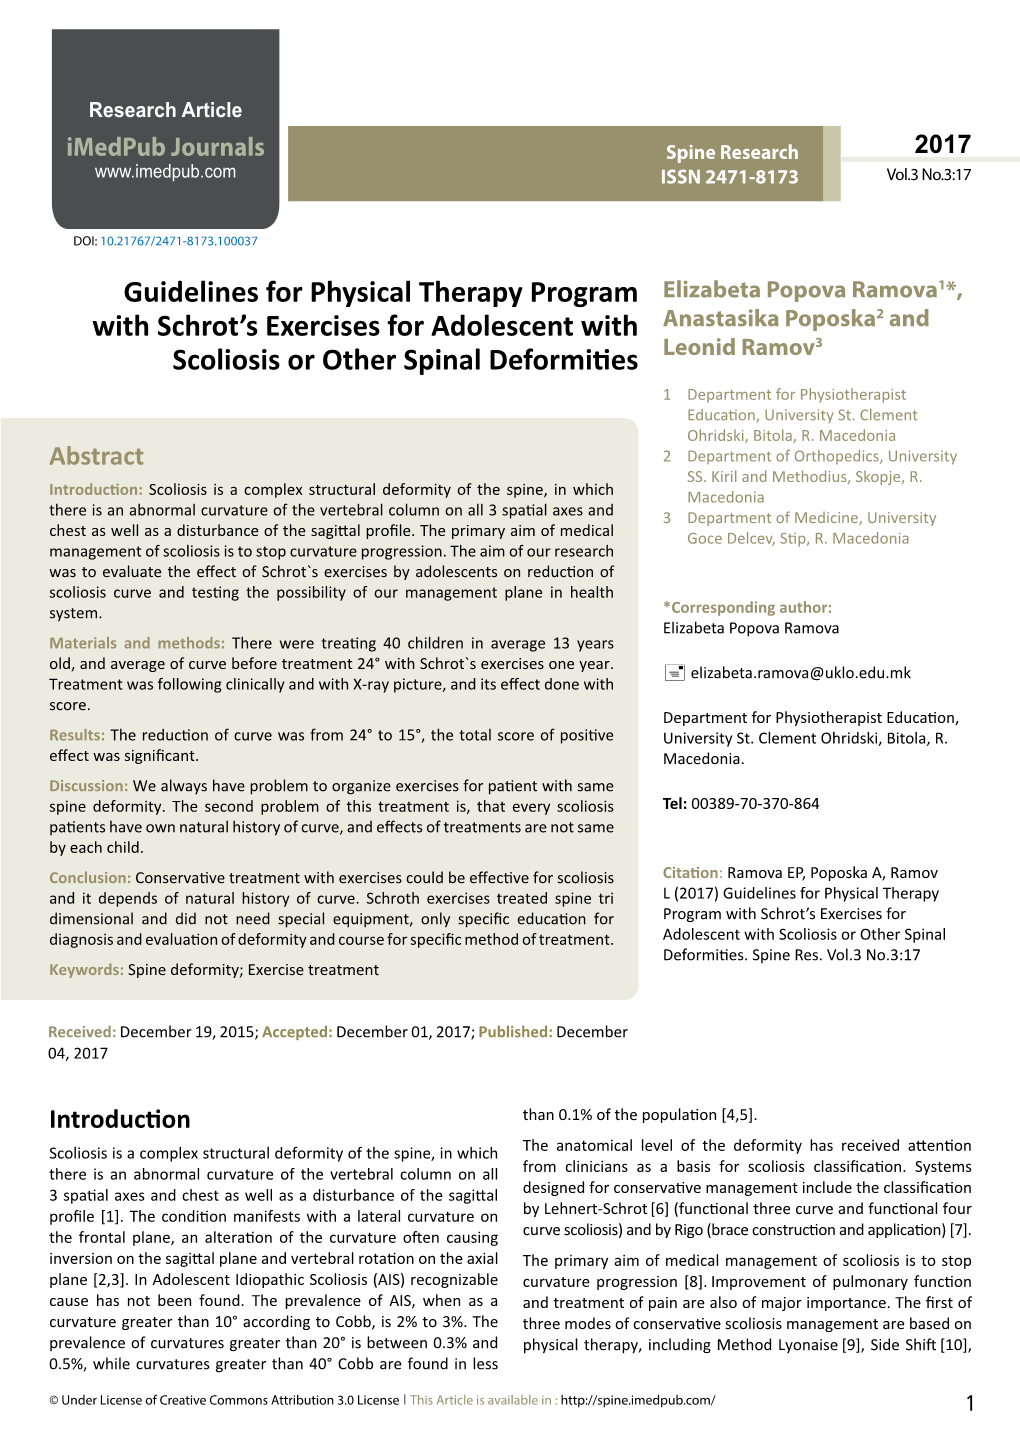 Guidelines for Physical Therapy Program with Schrot's Exercises For